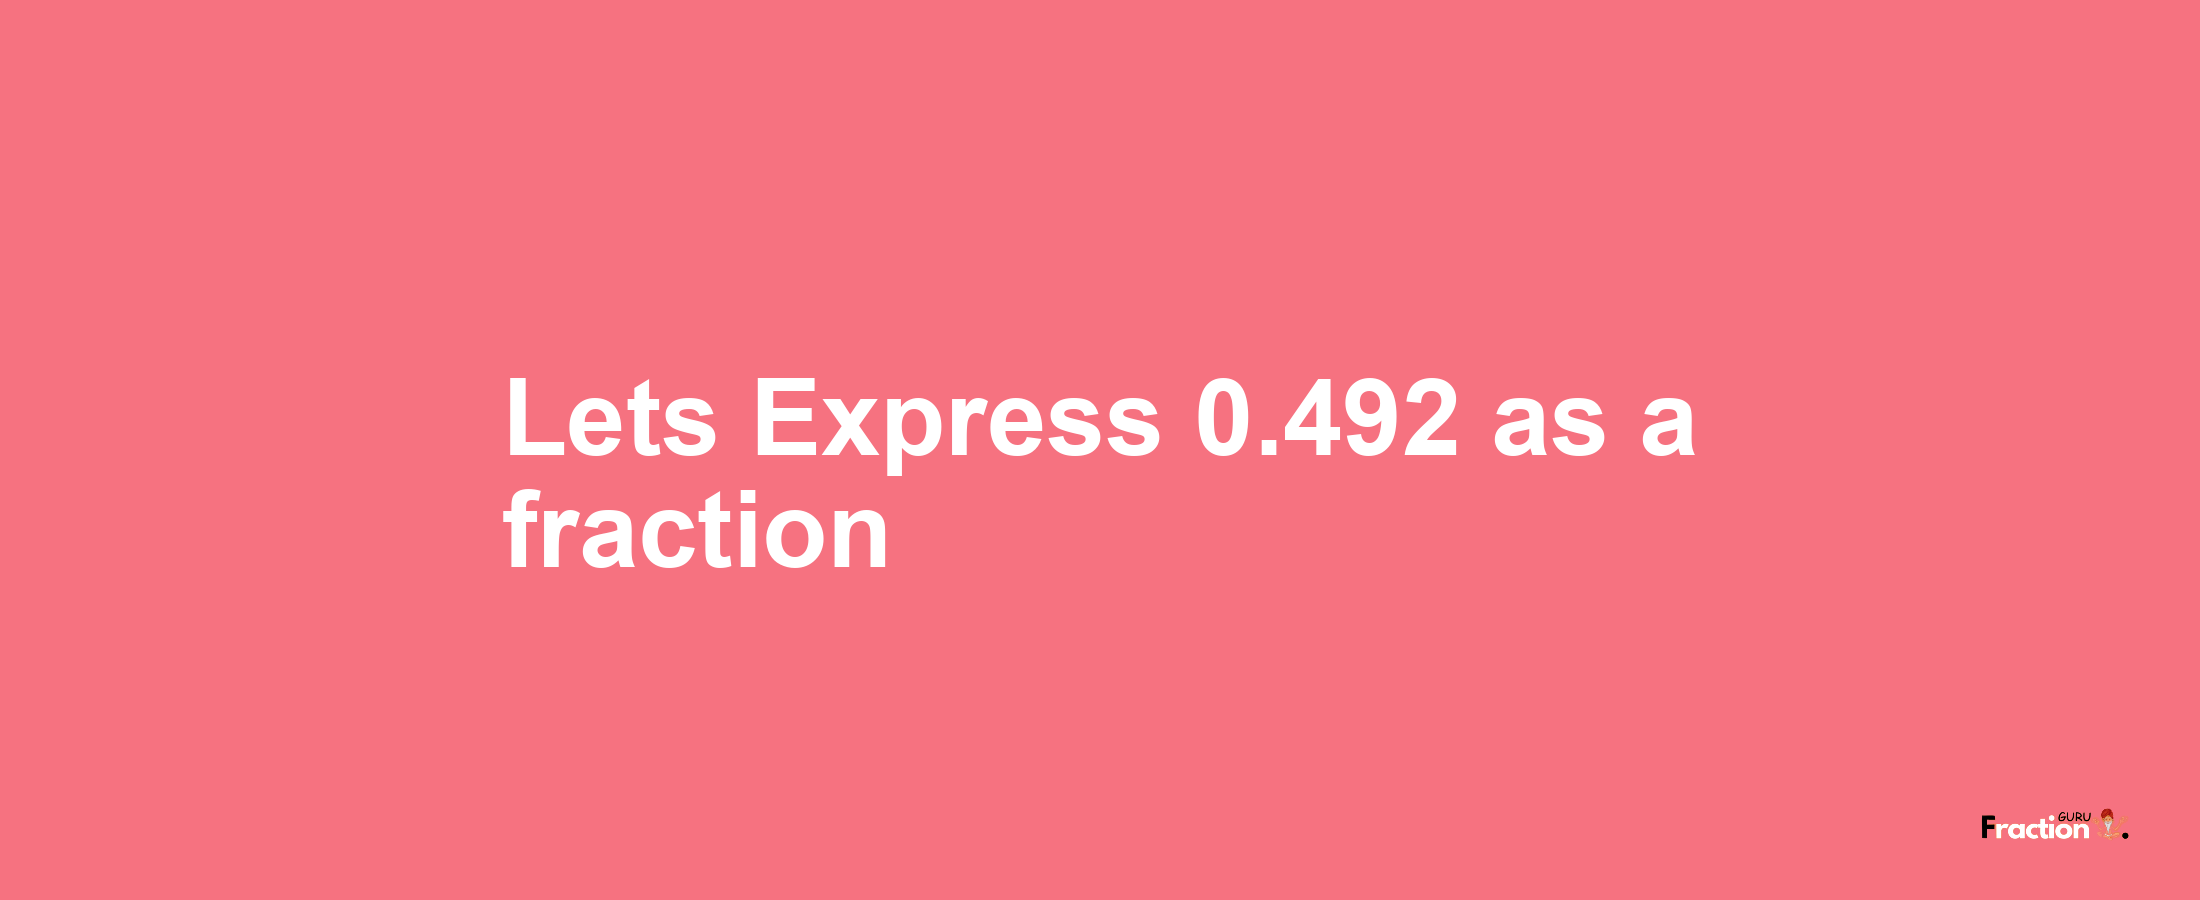 Lets Express 0.492 as afraction